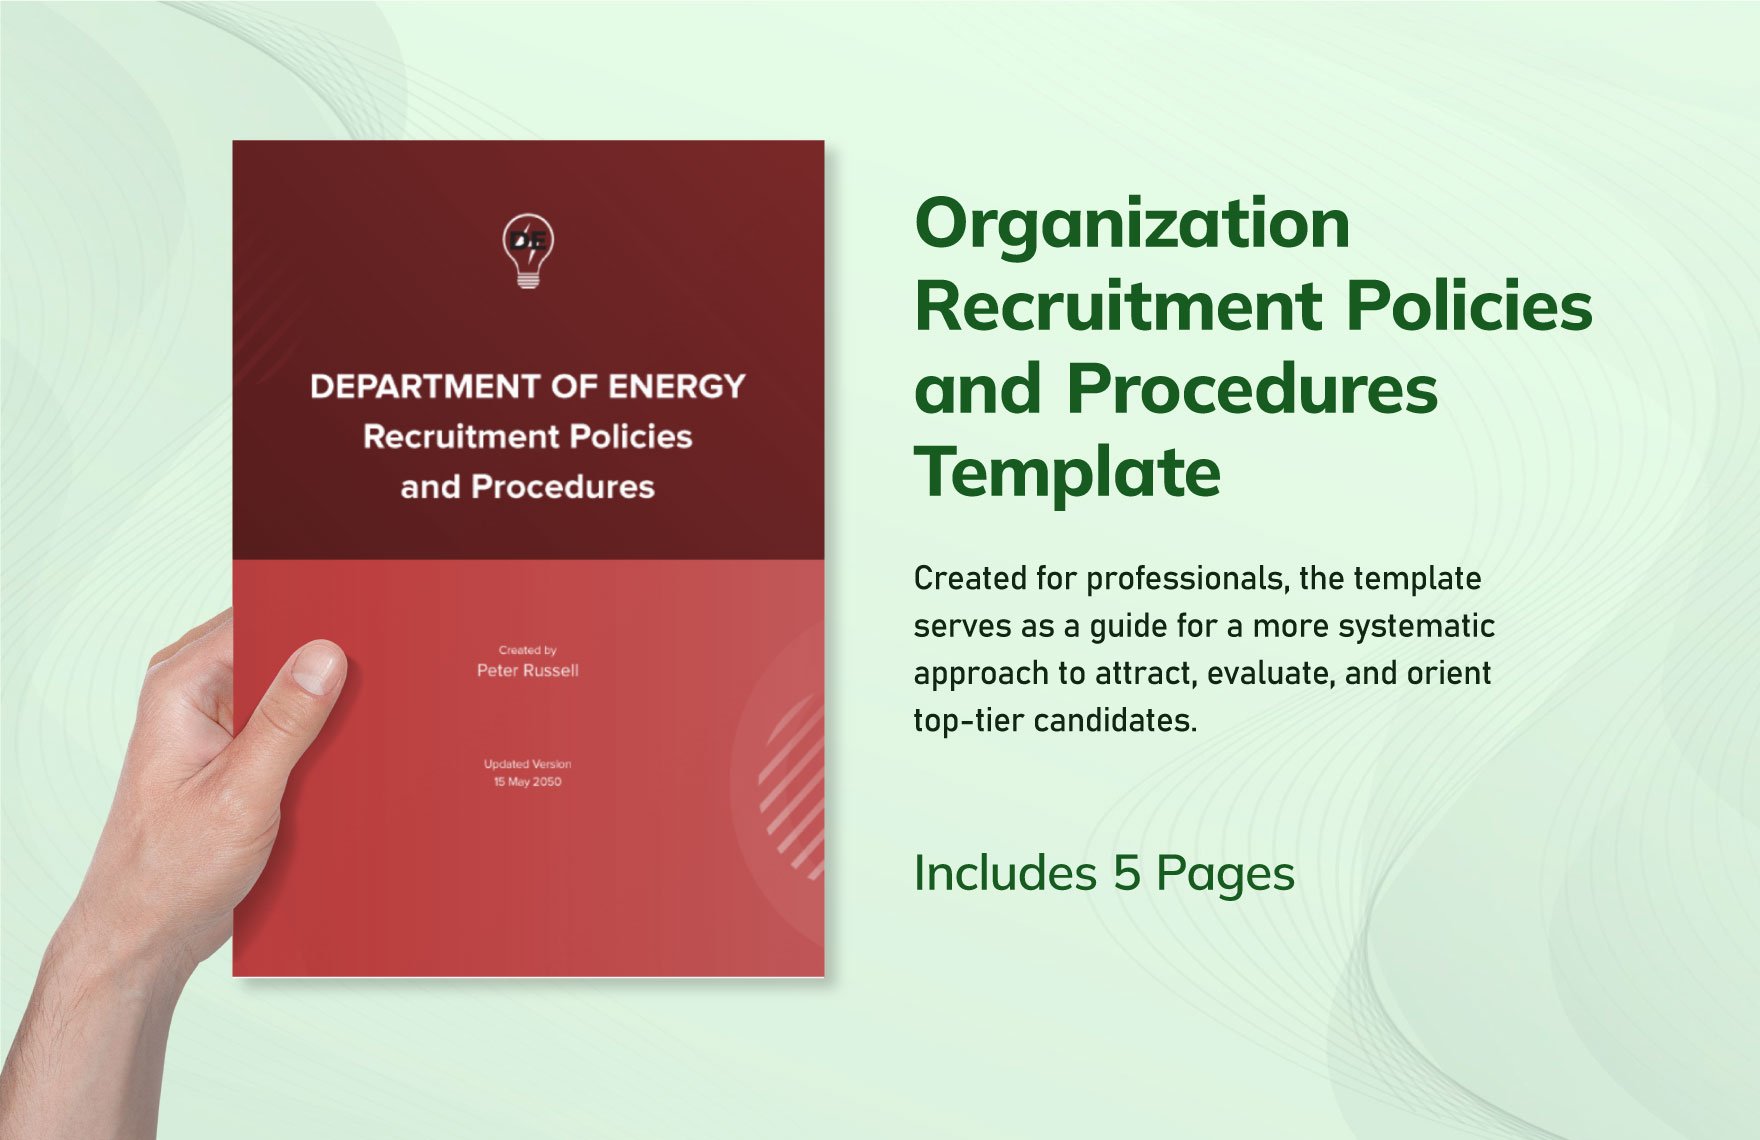 Organization Recruitment Policies and Procedures Template